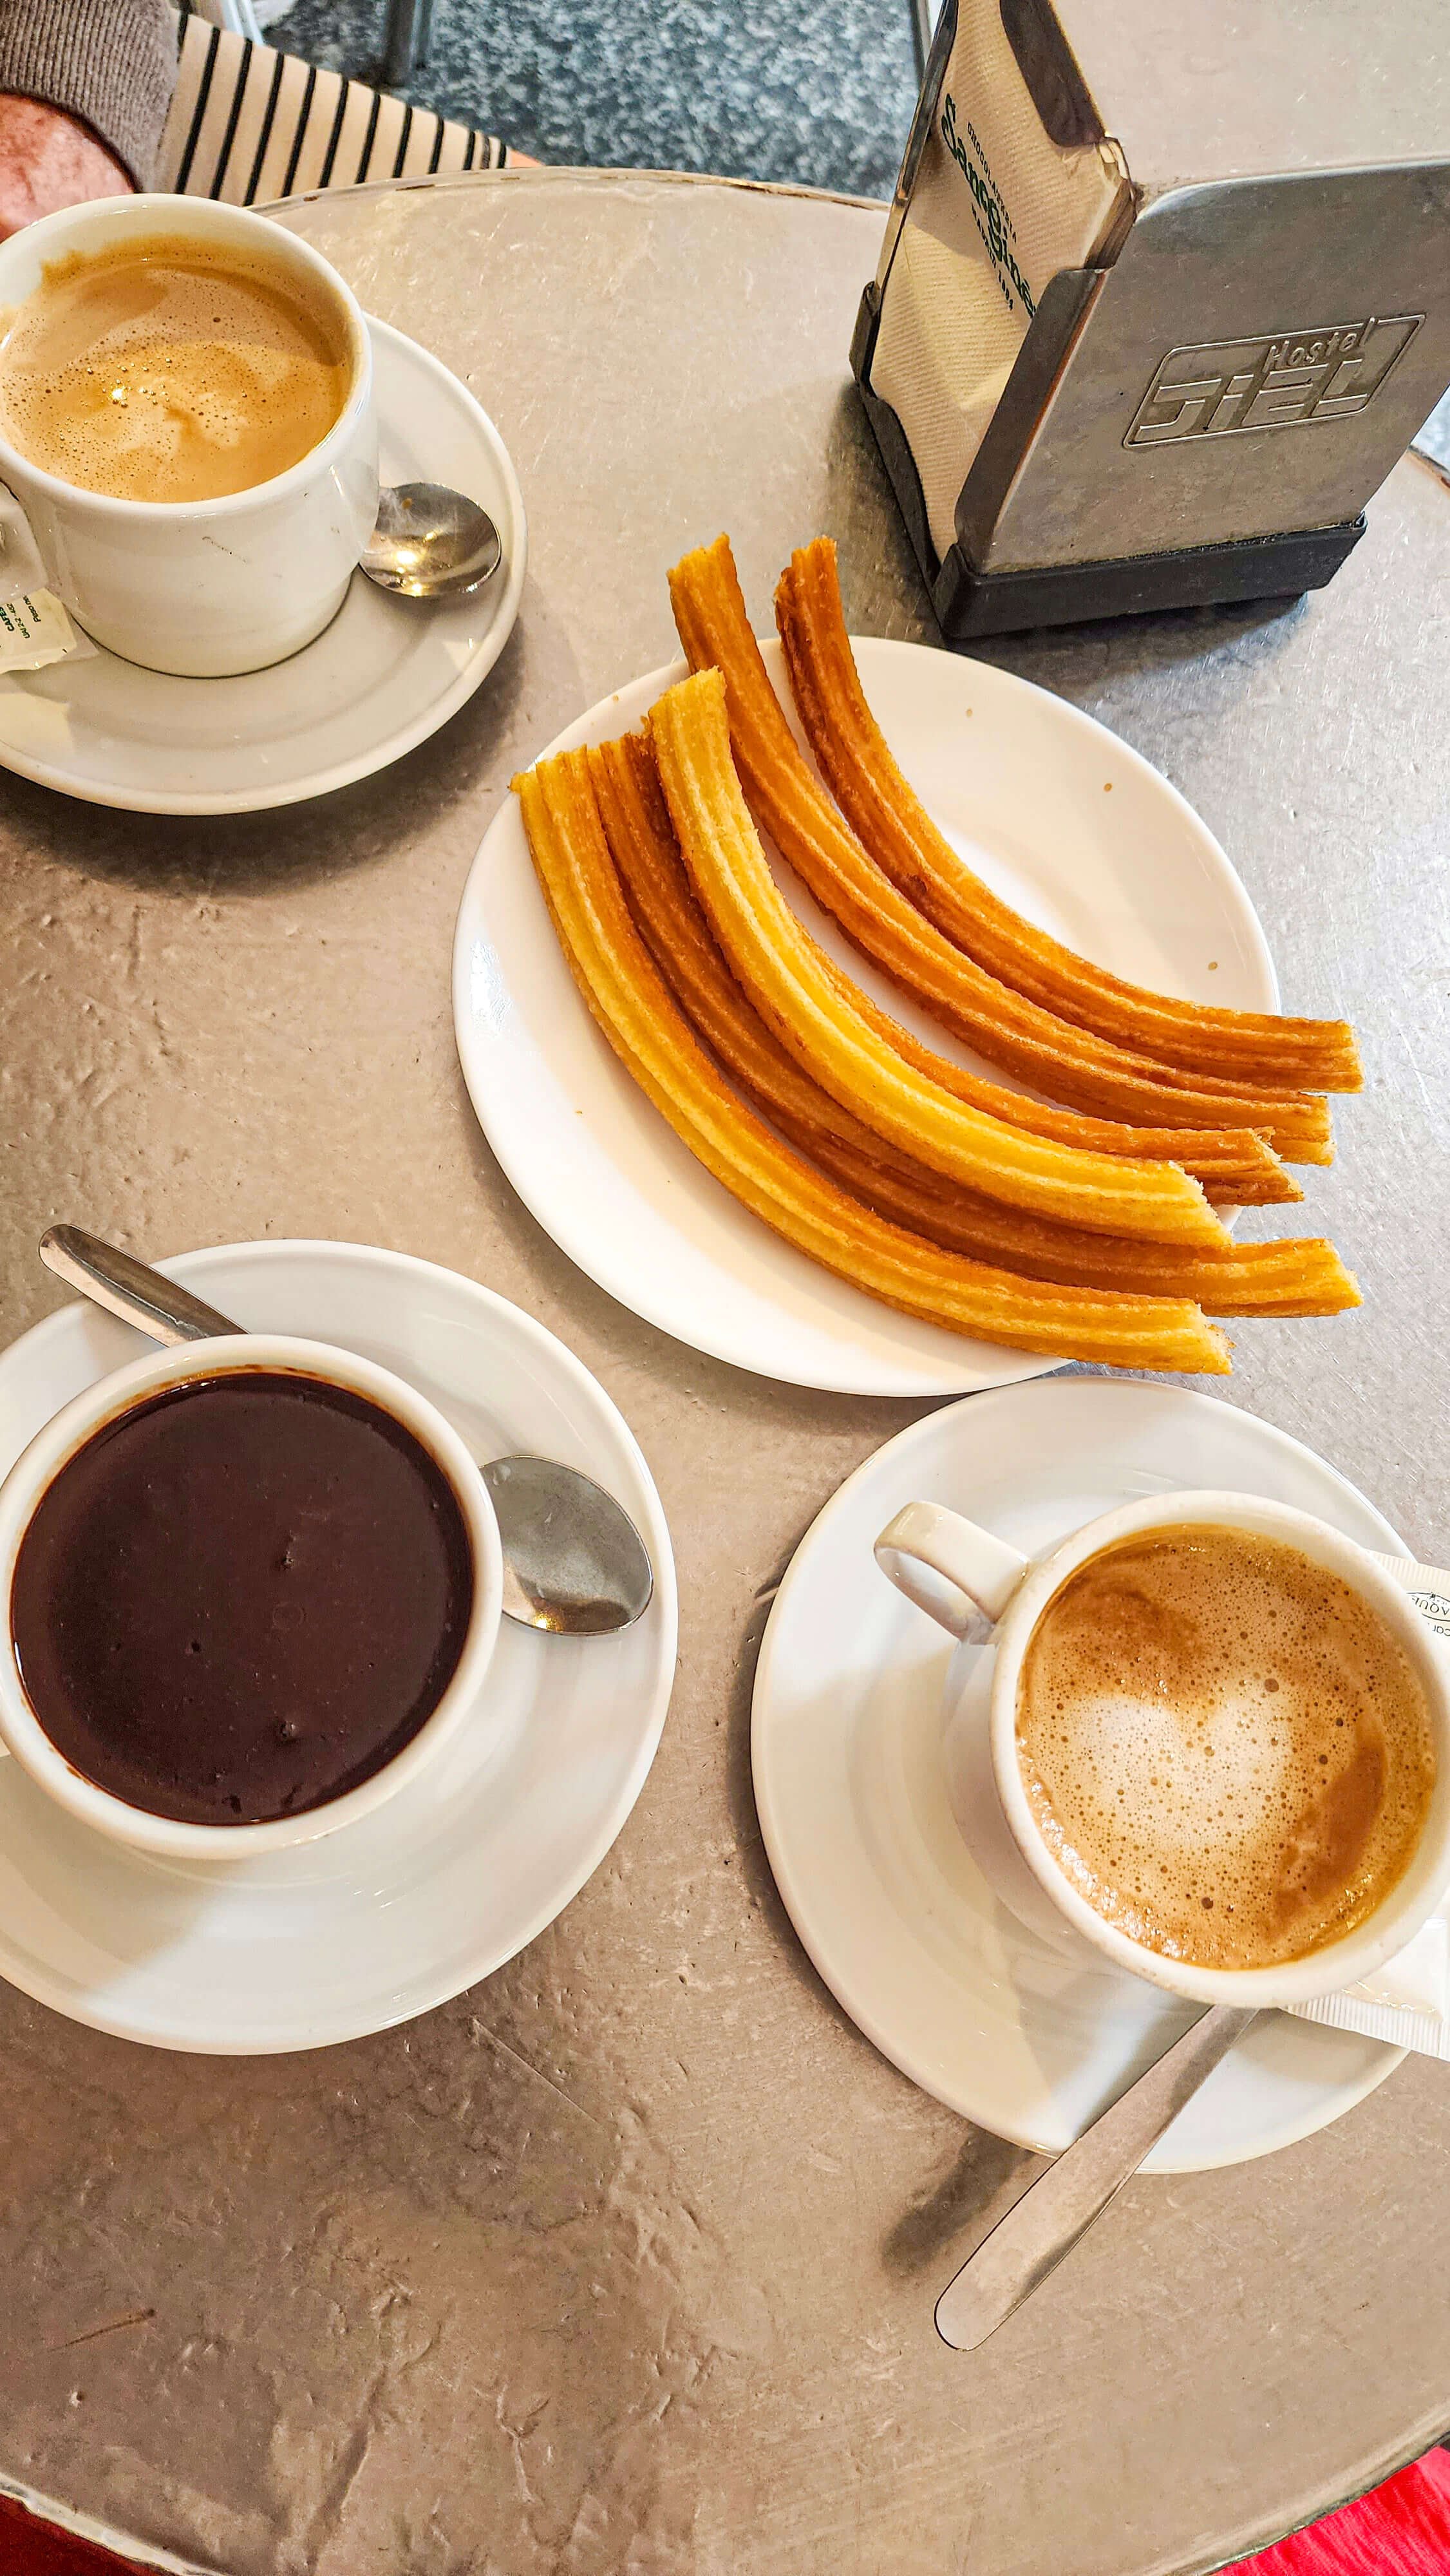 Churros from Chocolateria San Gines in Madrid